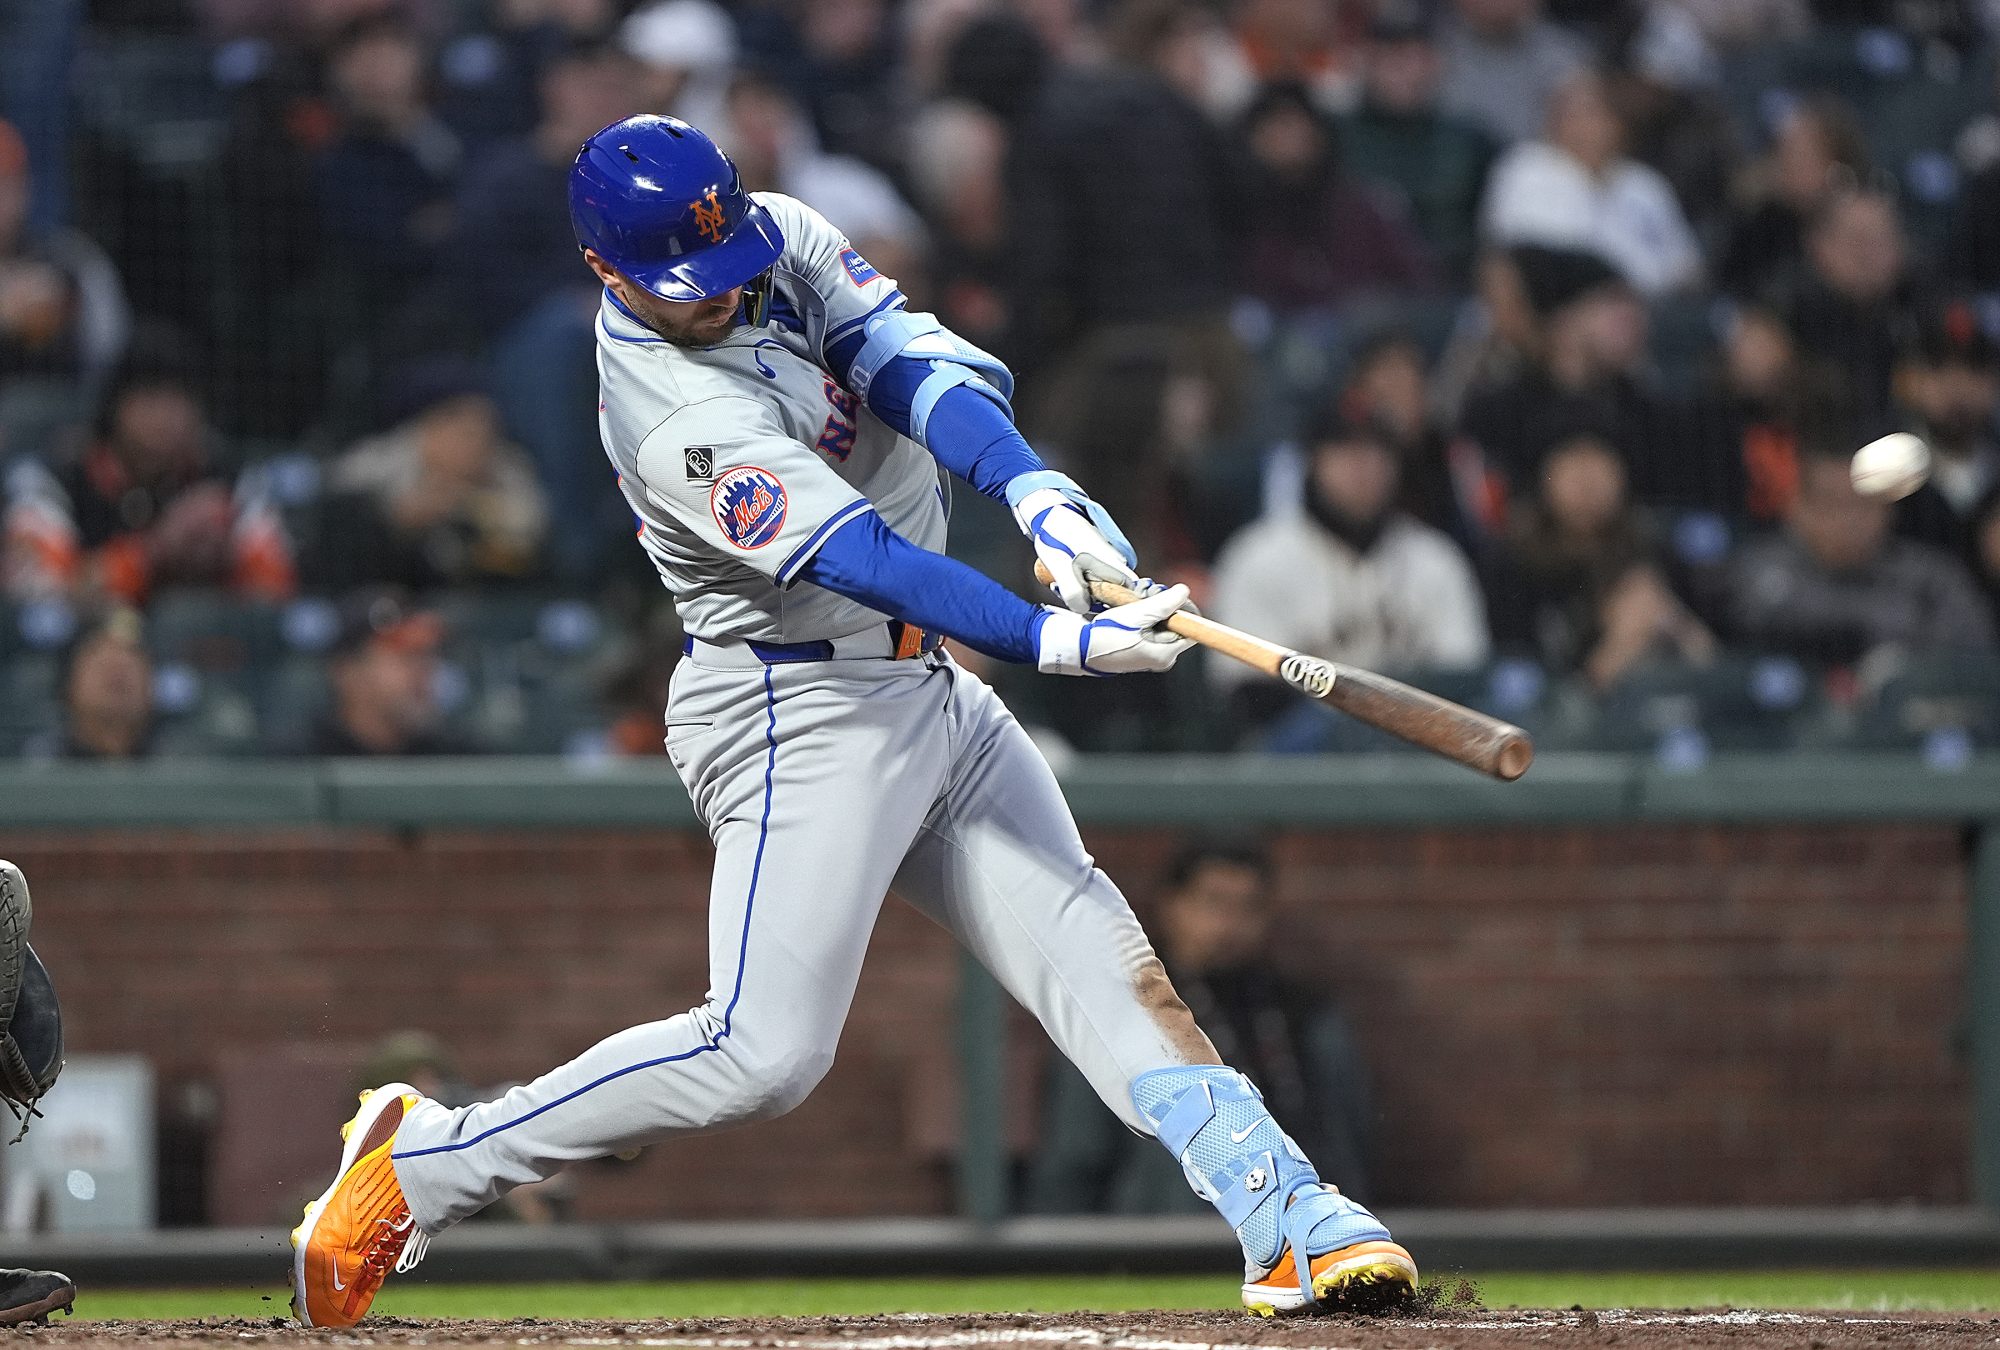 Pete Alonso #20 of the New York Mets hits a solo home run against the San Francisco Giants in the top of the fifth inning.